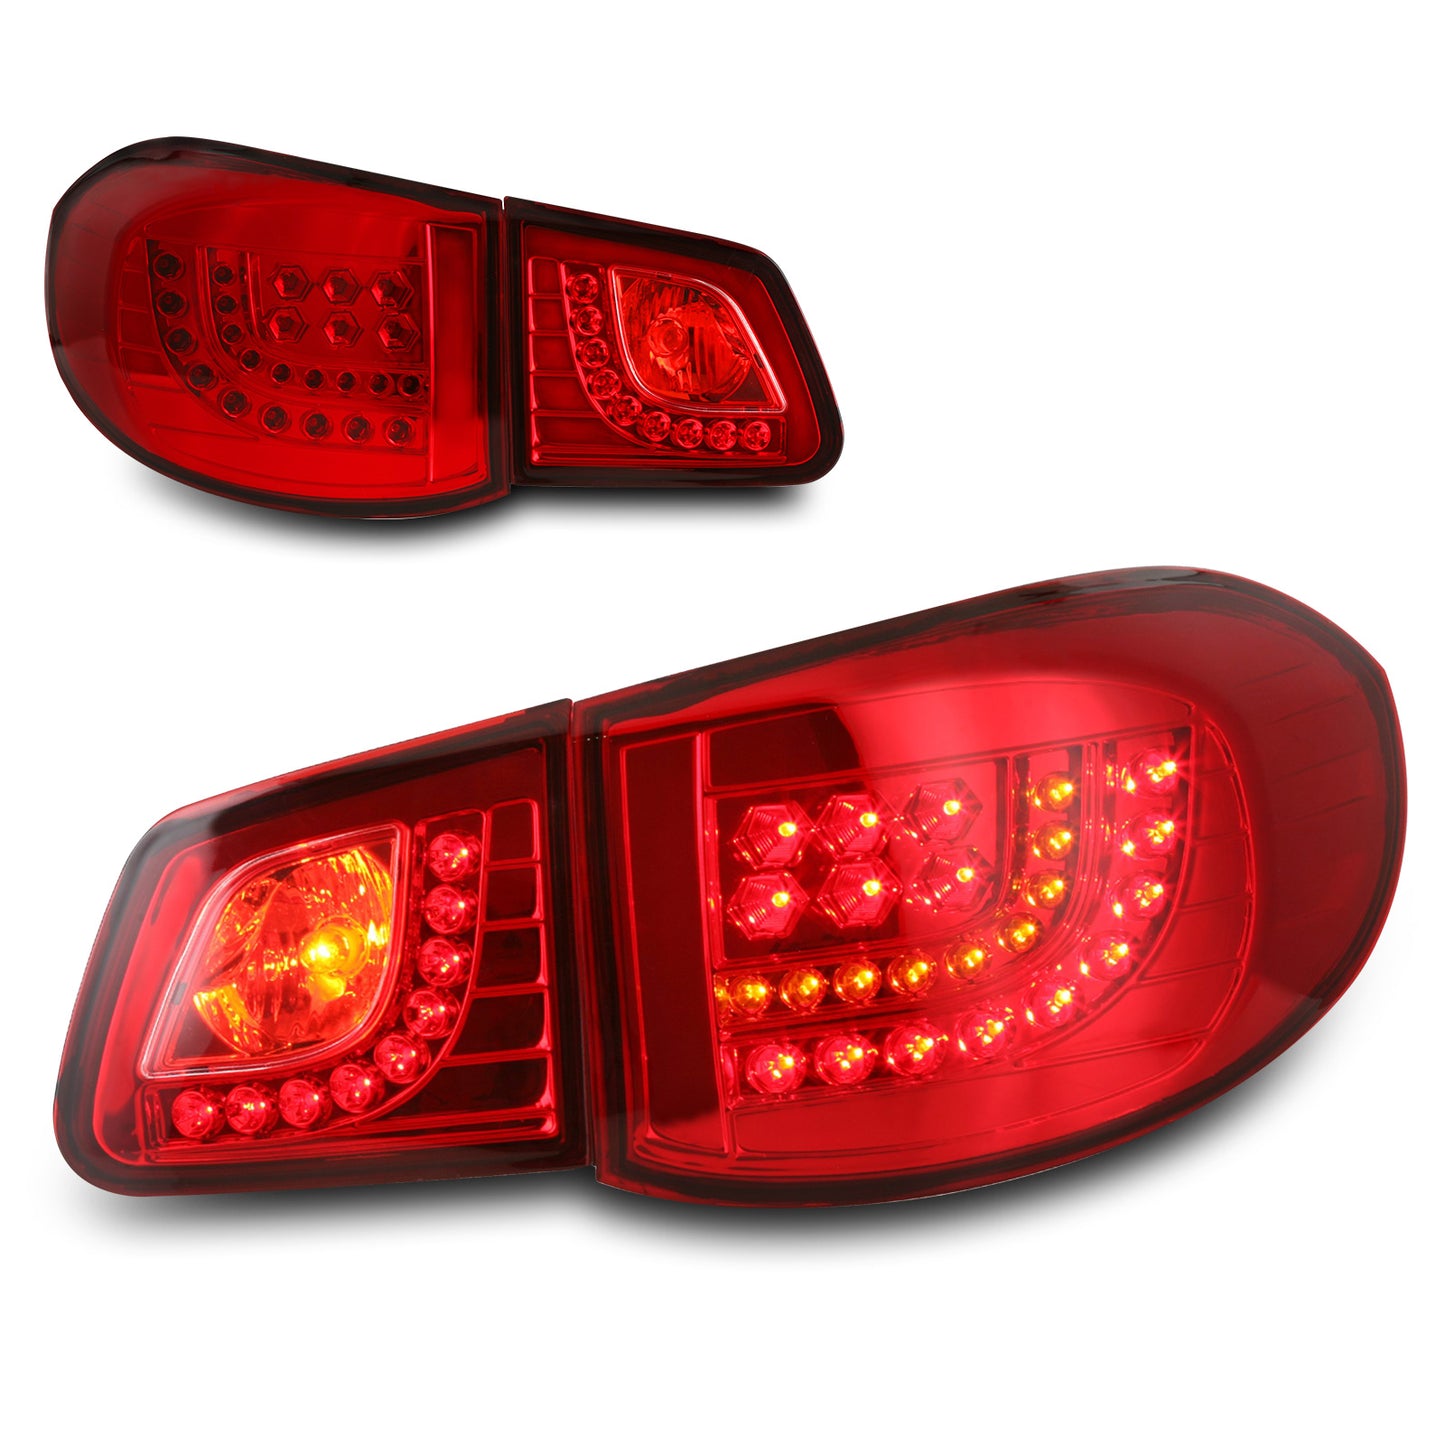 2009-2011 Volkswagen Tiguan LED Tail Lights - Chrome / Red